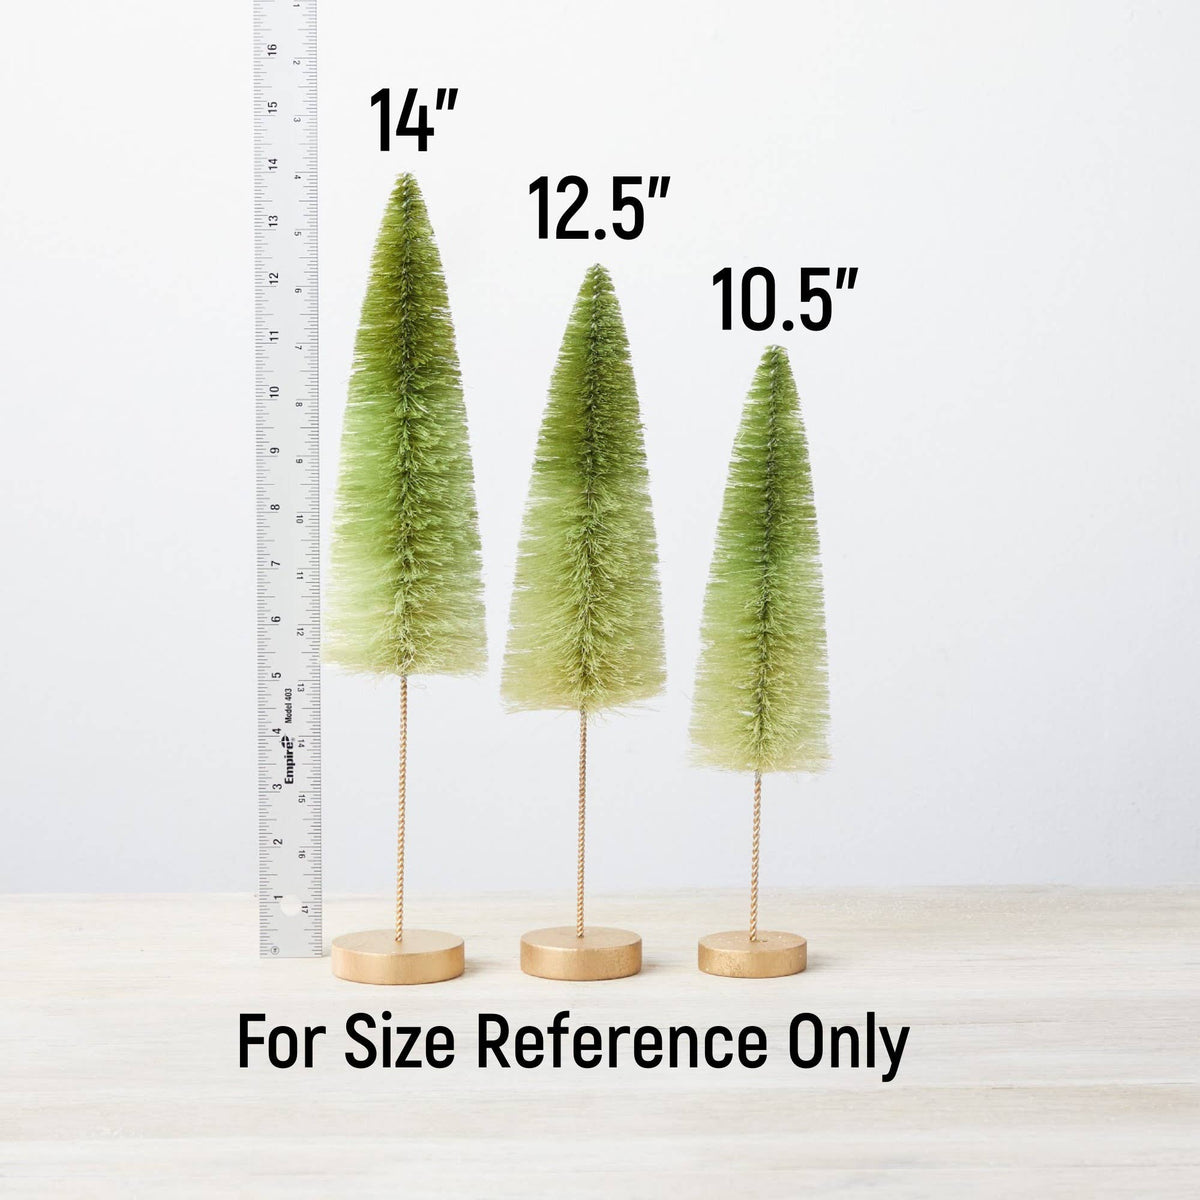 Set of 3 Green Ombre Bottle Brush Trees with Ruler for Scale